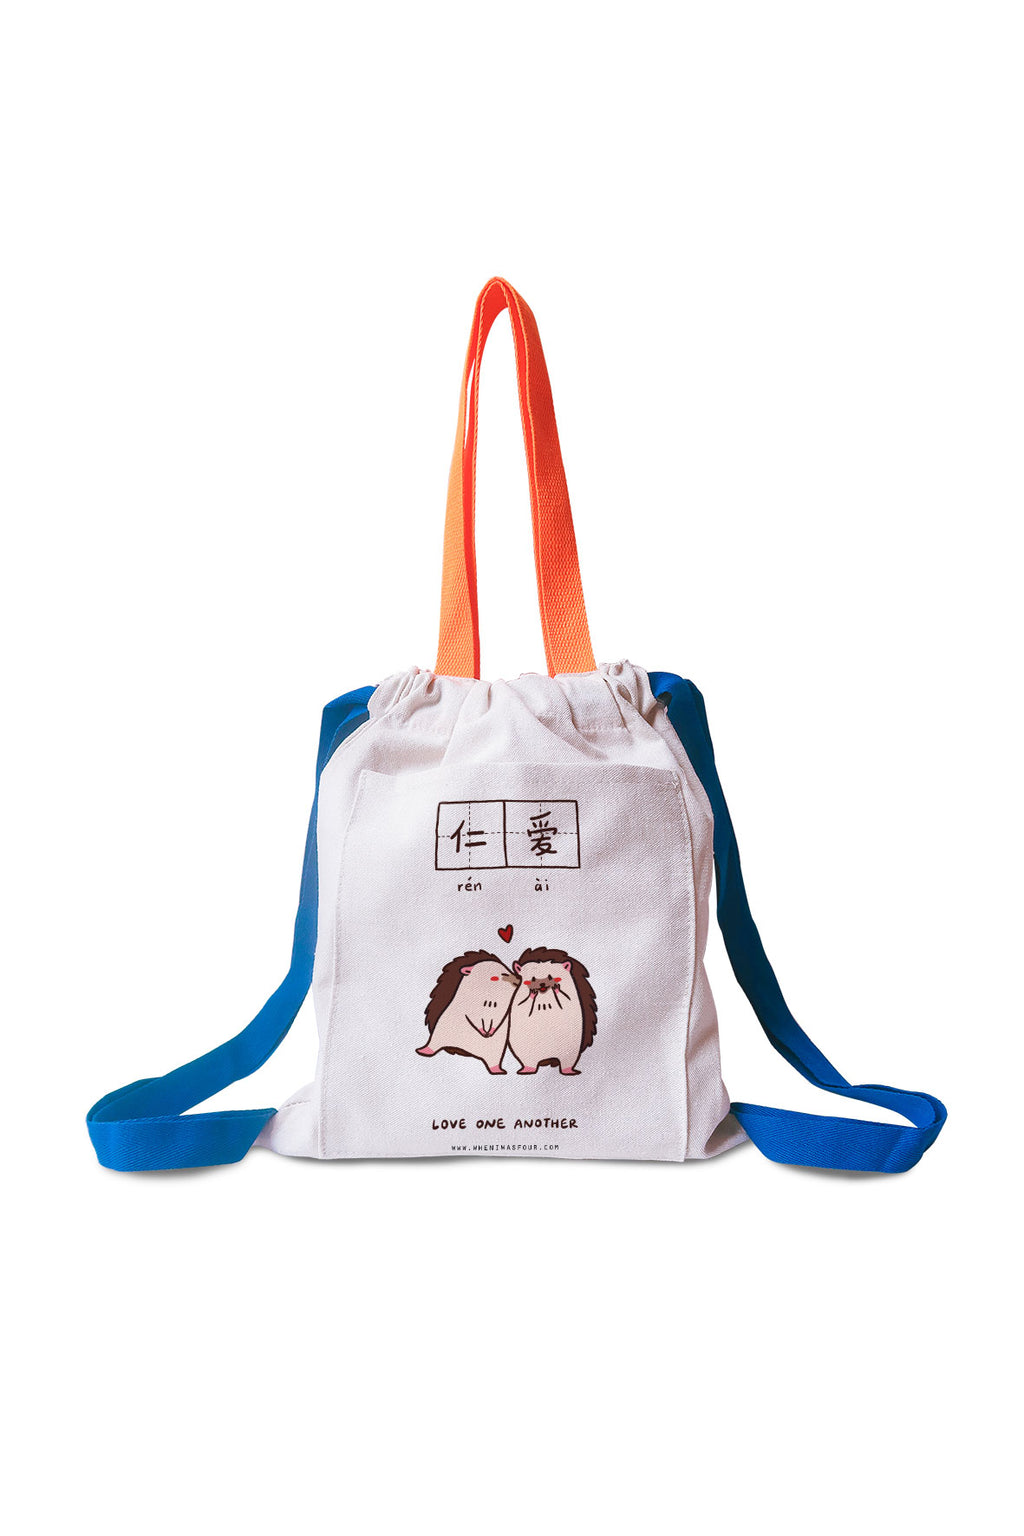 Love One Another Kids Backpack - Backpack by wheniwasfour | 小时候, Singapore local artist online gift store